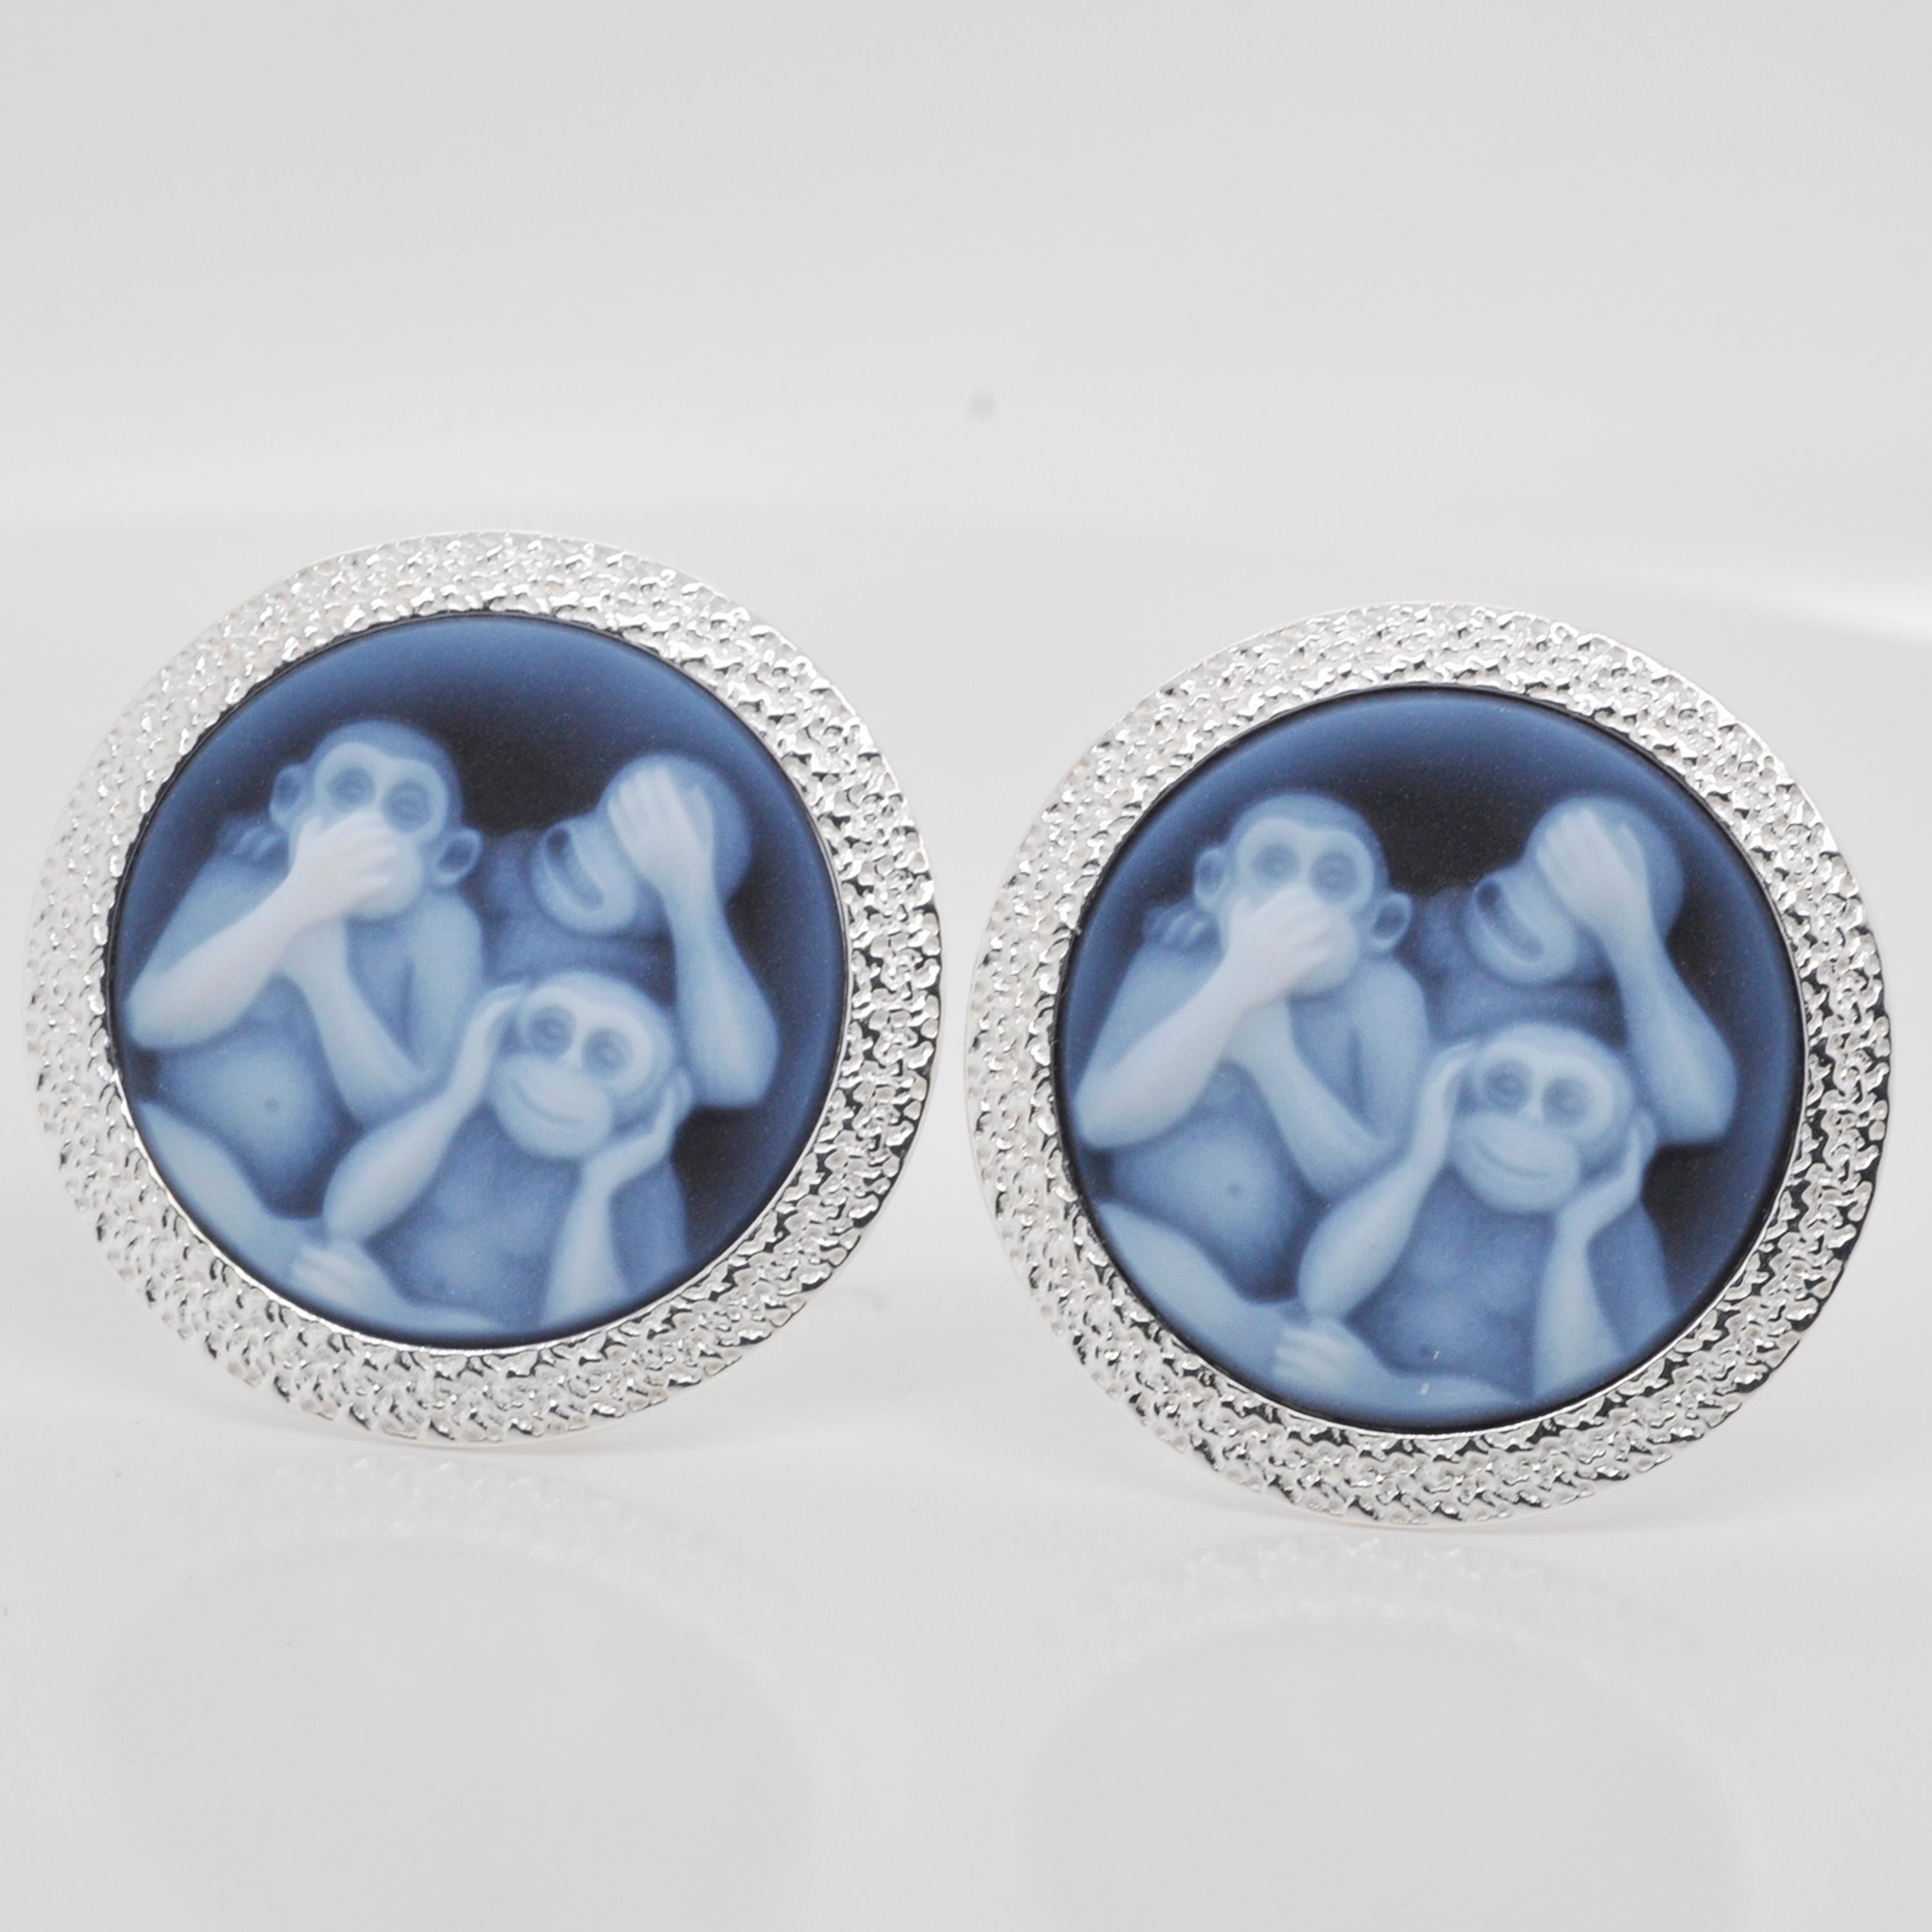 Here's our three wise monkey cameo cufflinks made in sterling silver. The cameos are made in Germany by an expert cameo engraver on the relief of 100% natural agate rock from Brazil (a variety of chalcedony) such that the elements on the carvings